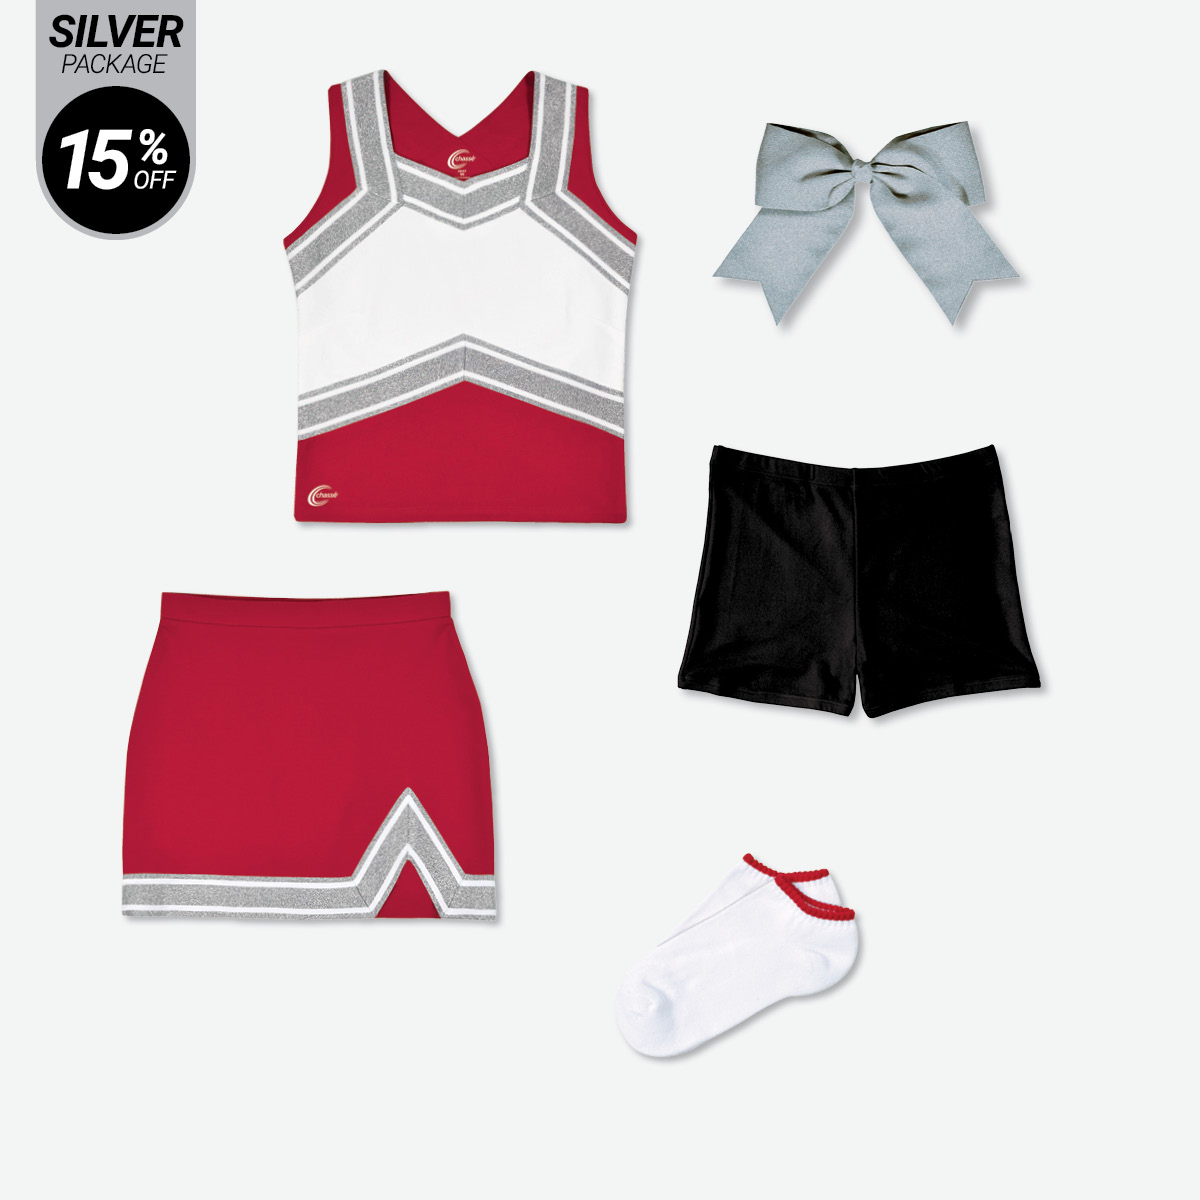 Cheer Uniform Packages: Cheerleading Packages with Uniform, Socks, Poms ...